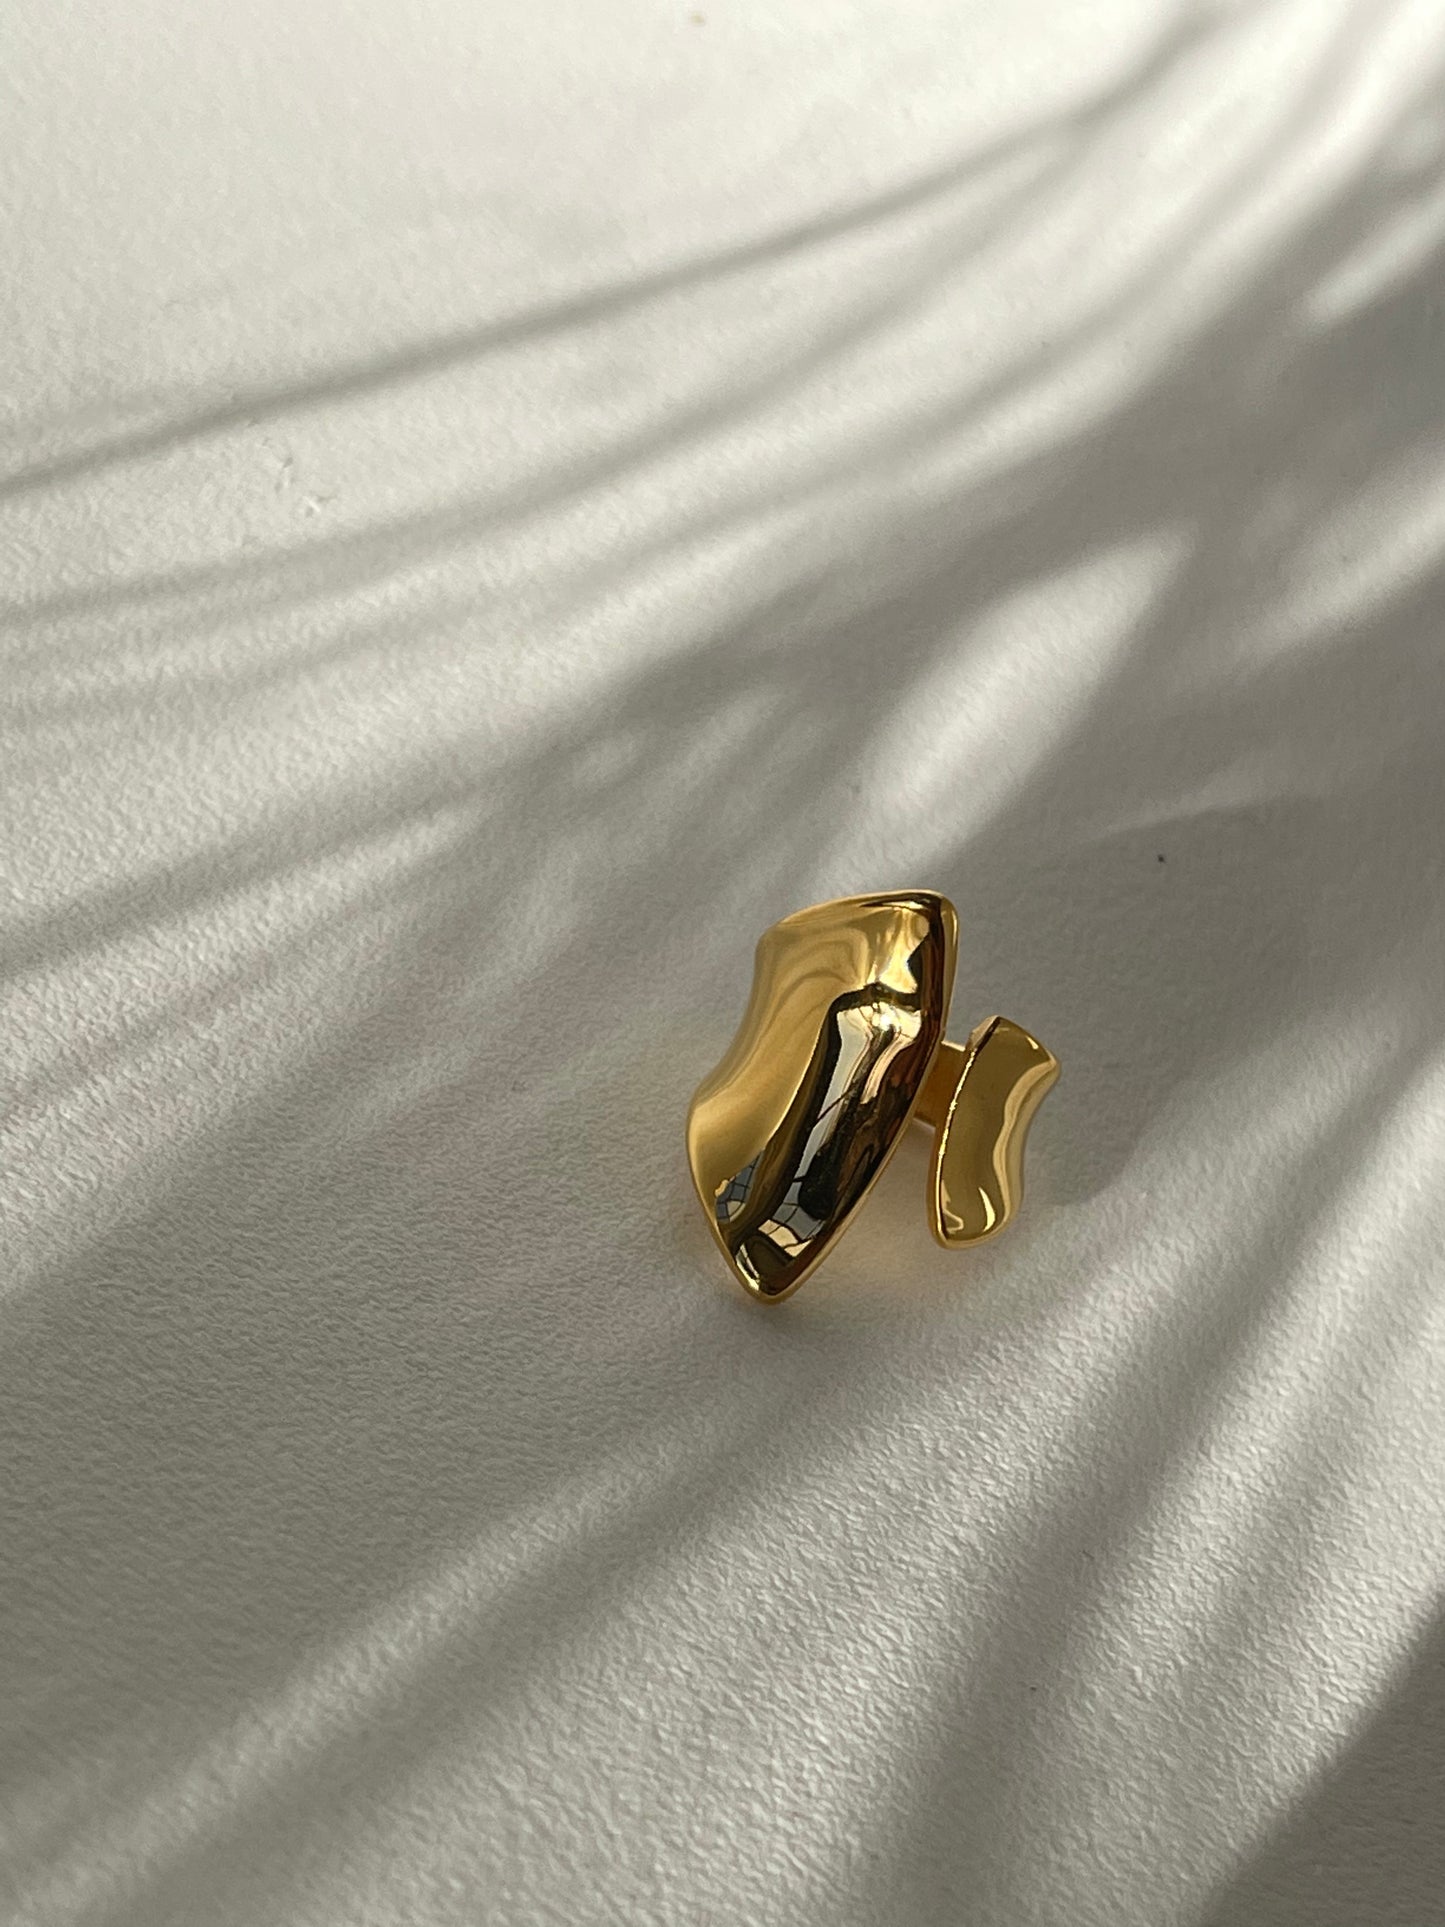 Gladius Armor Stainless Steel Ring In 18k Gold Plated